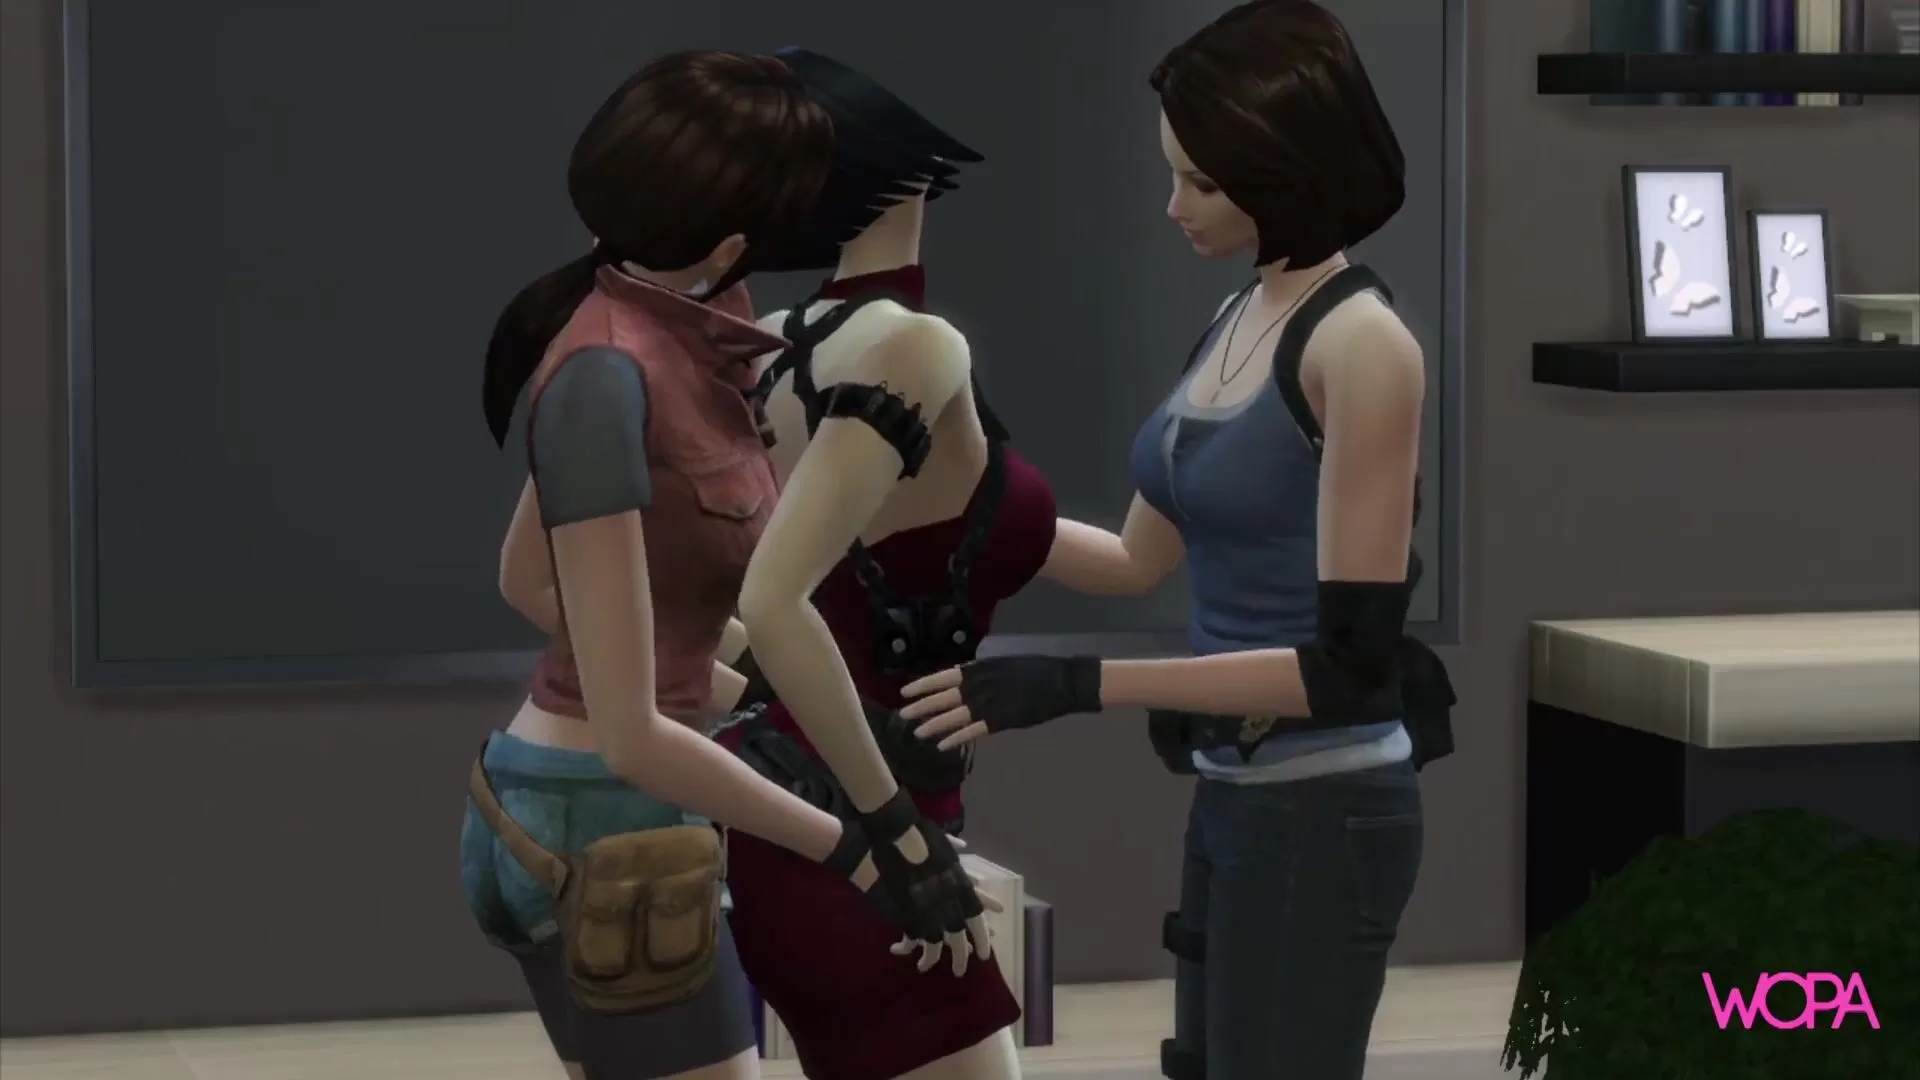 Lesbian Resident Evil - Resident evil - Lesbian Parody - Ada Wong, Jill Valentine and Claire  Redfield @ XLilith